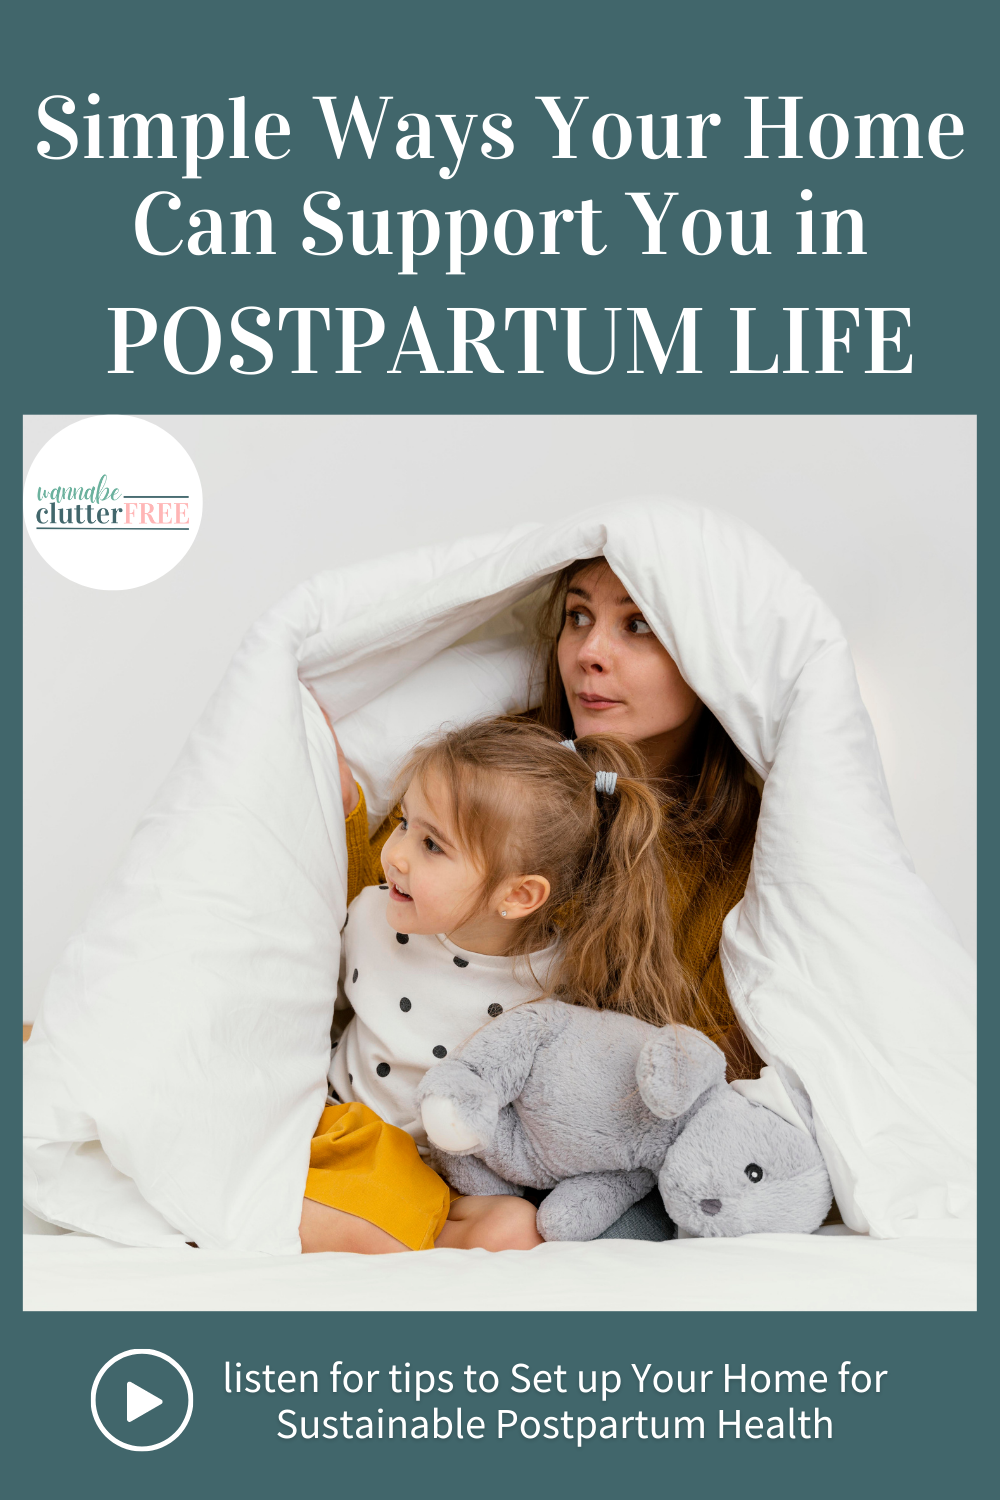 Simple Ways Your Home Can Support You in Postpartum Life